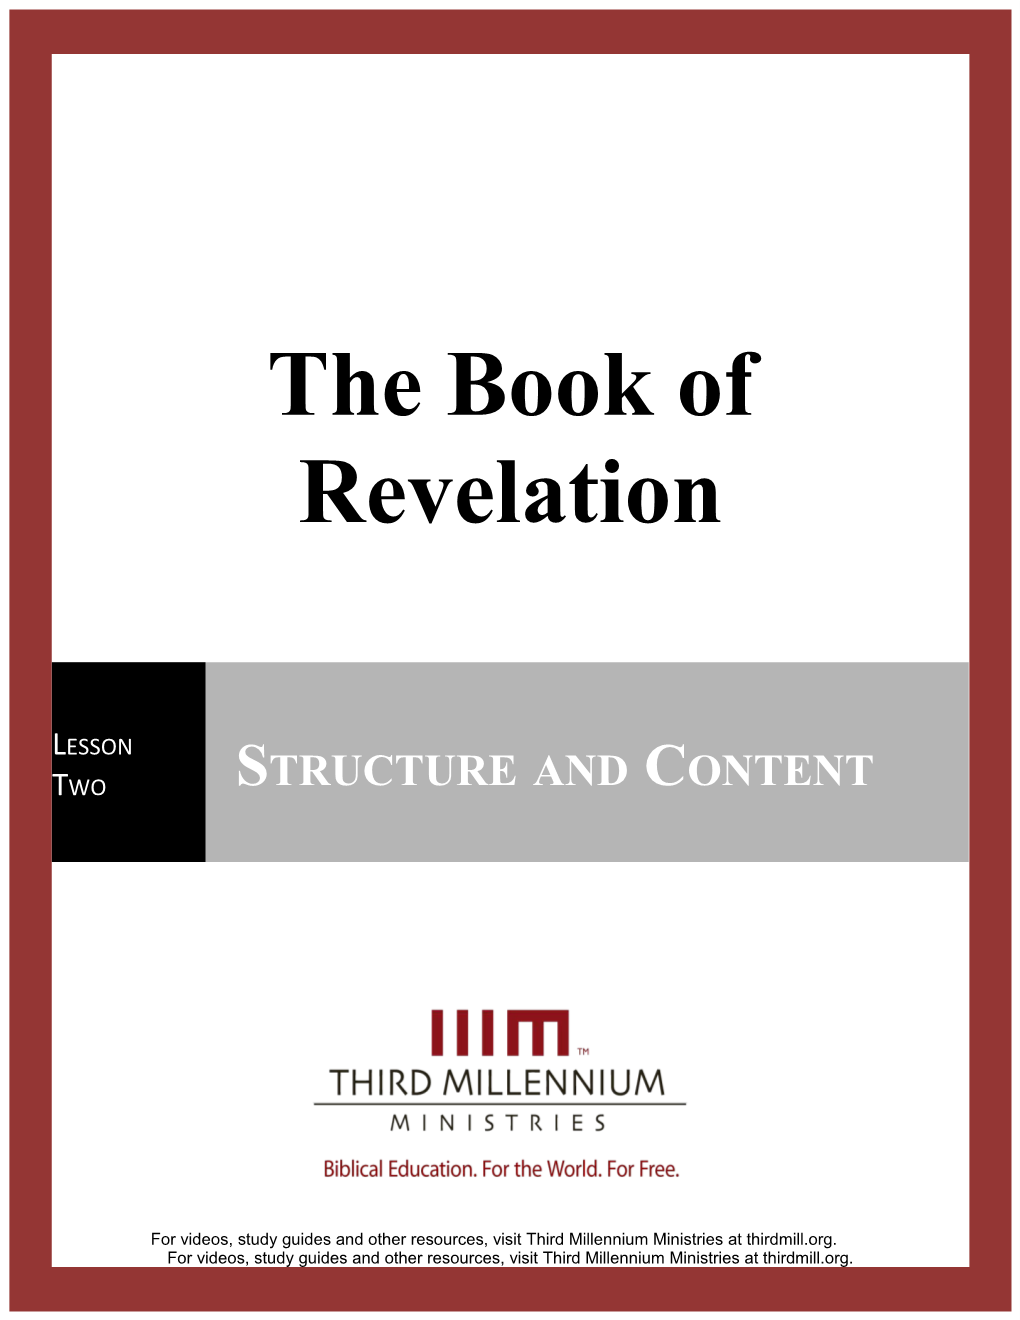 The Book of Revelation, Lesson 2